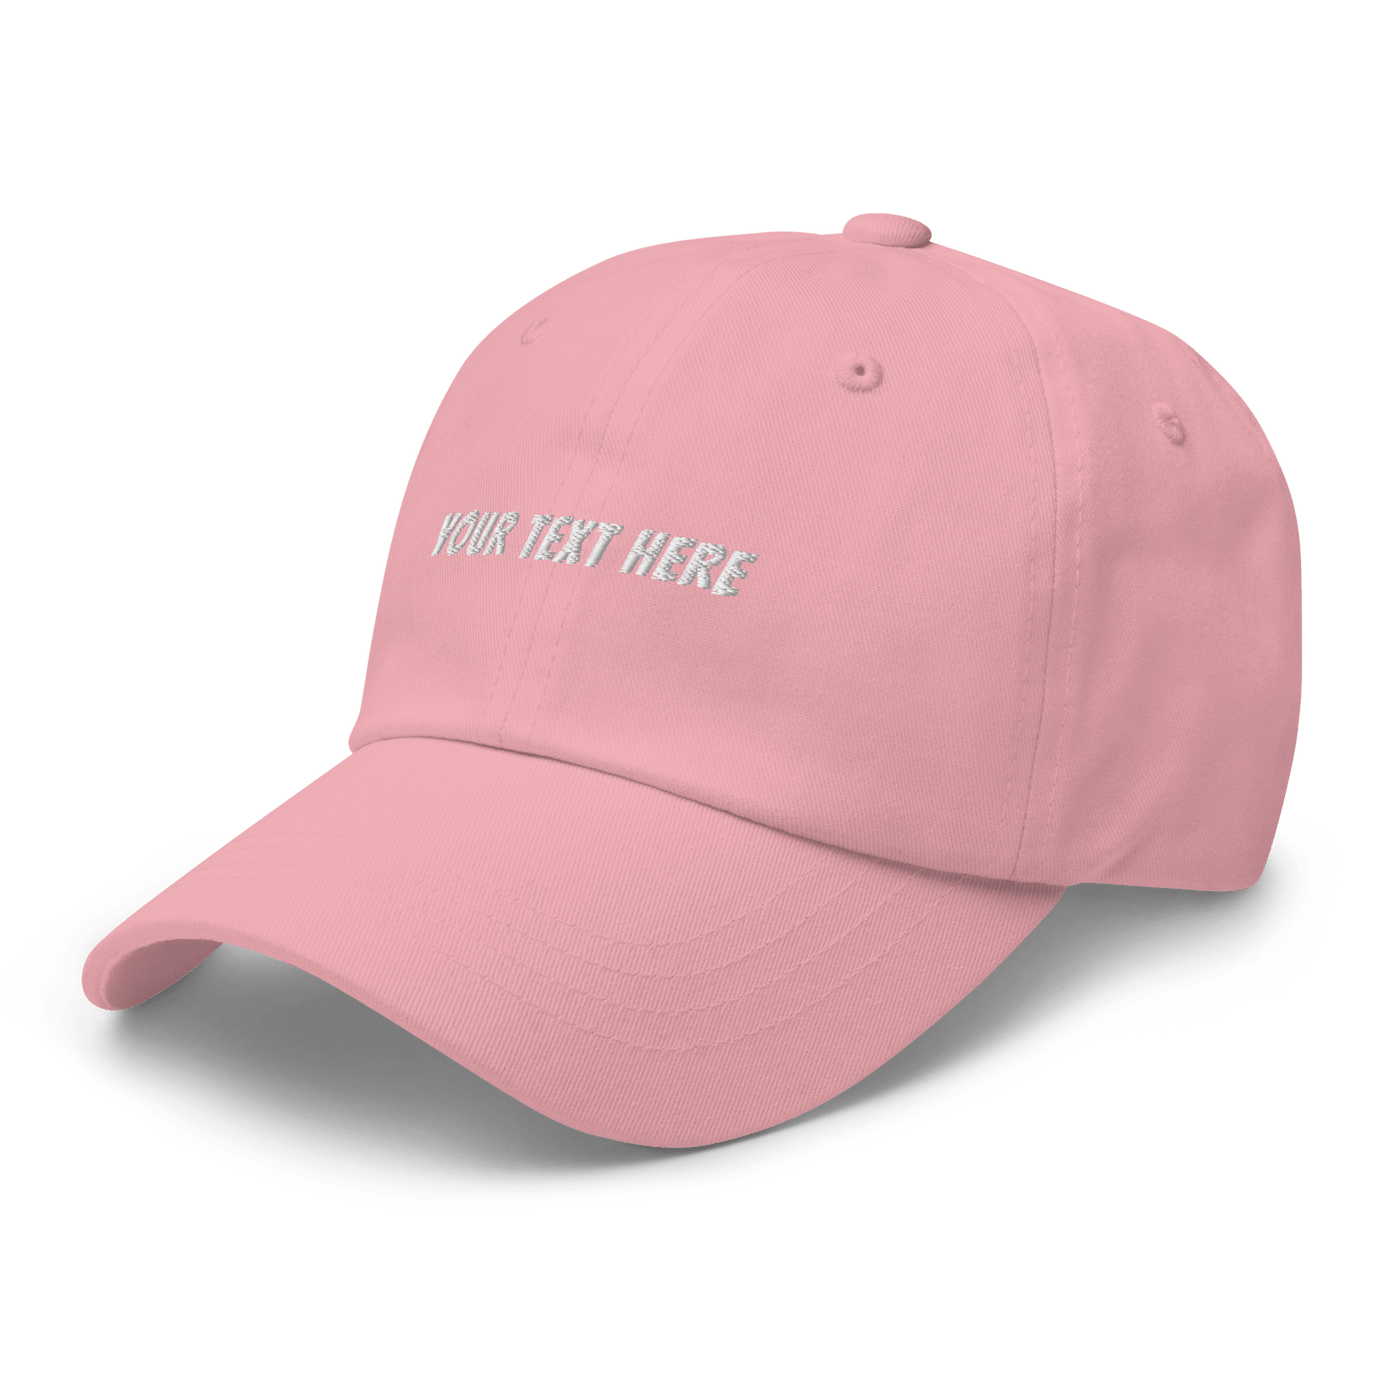 Customize Your Own Dad hat - Banger Font - Pink - - Just Another Cap Store